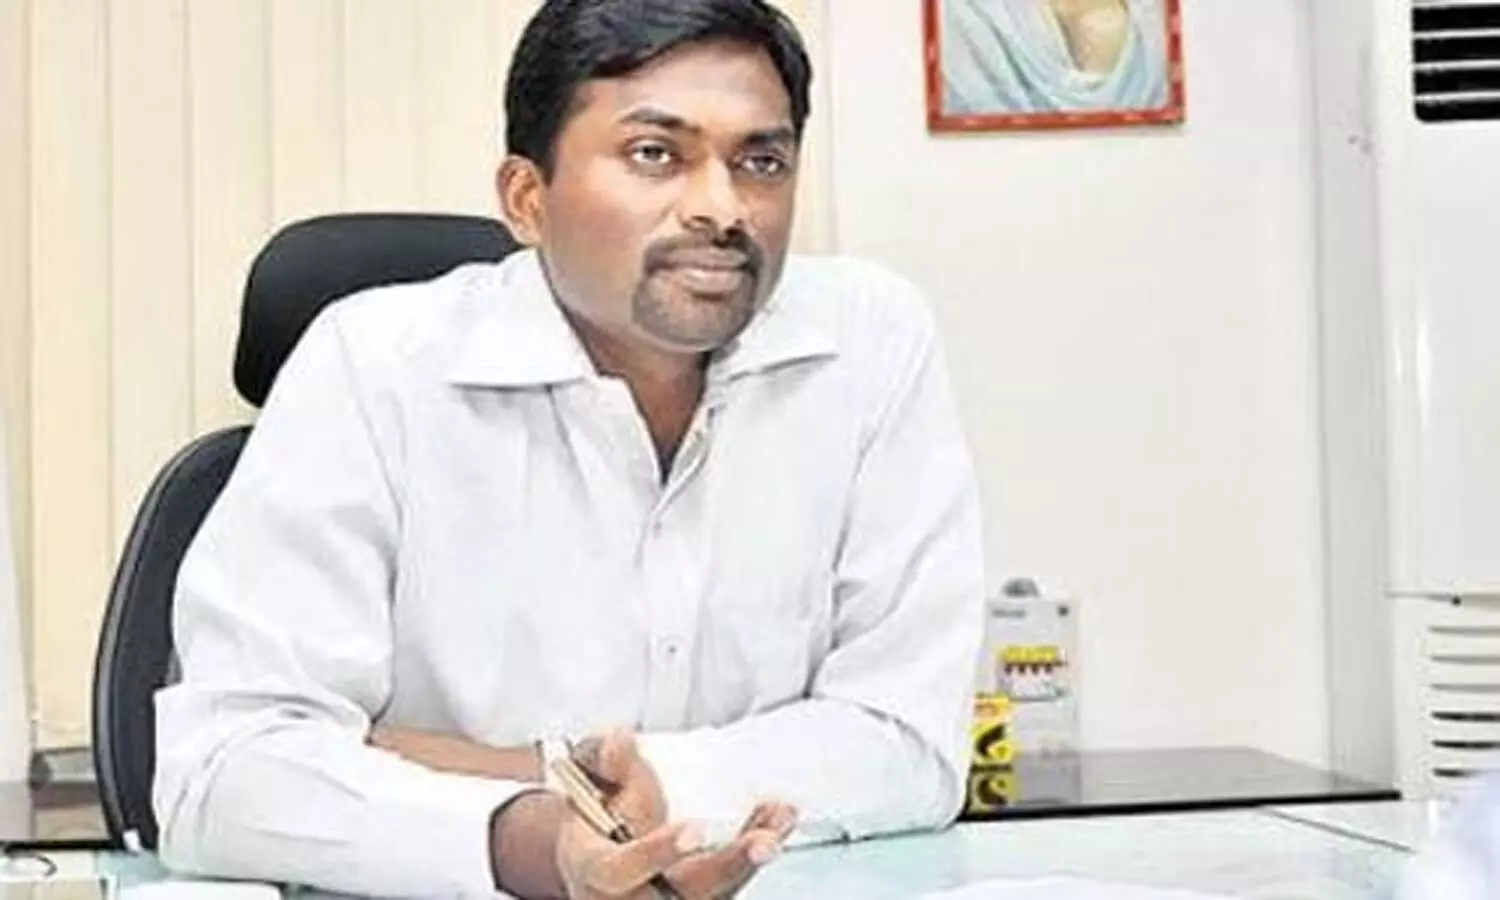 Ronald Ross appointed Commissioner of GHMC